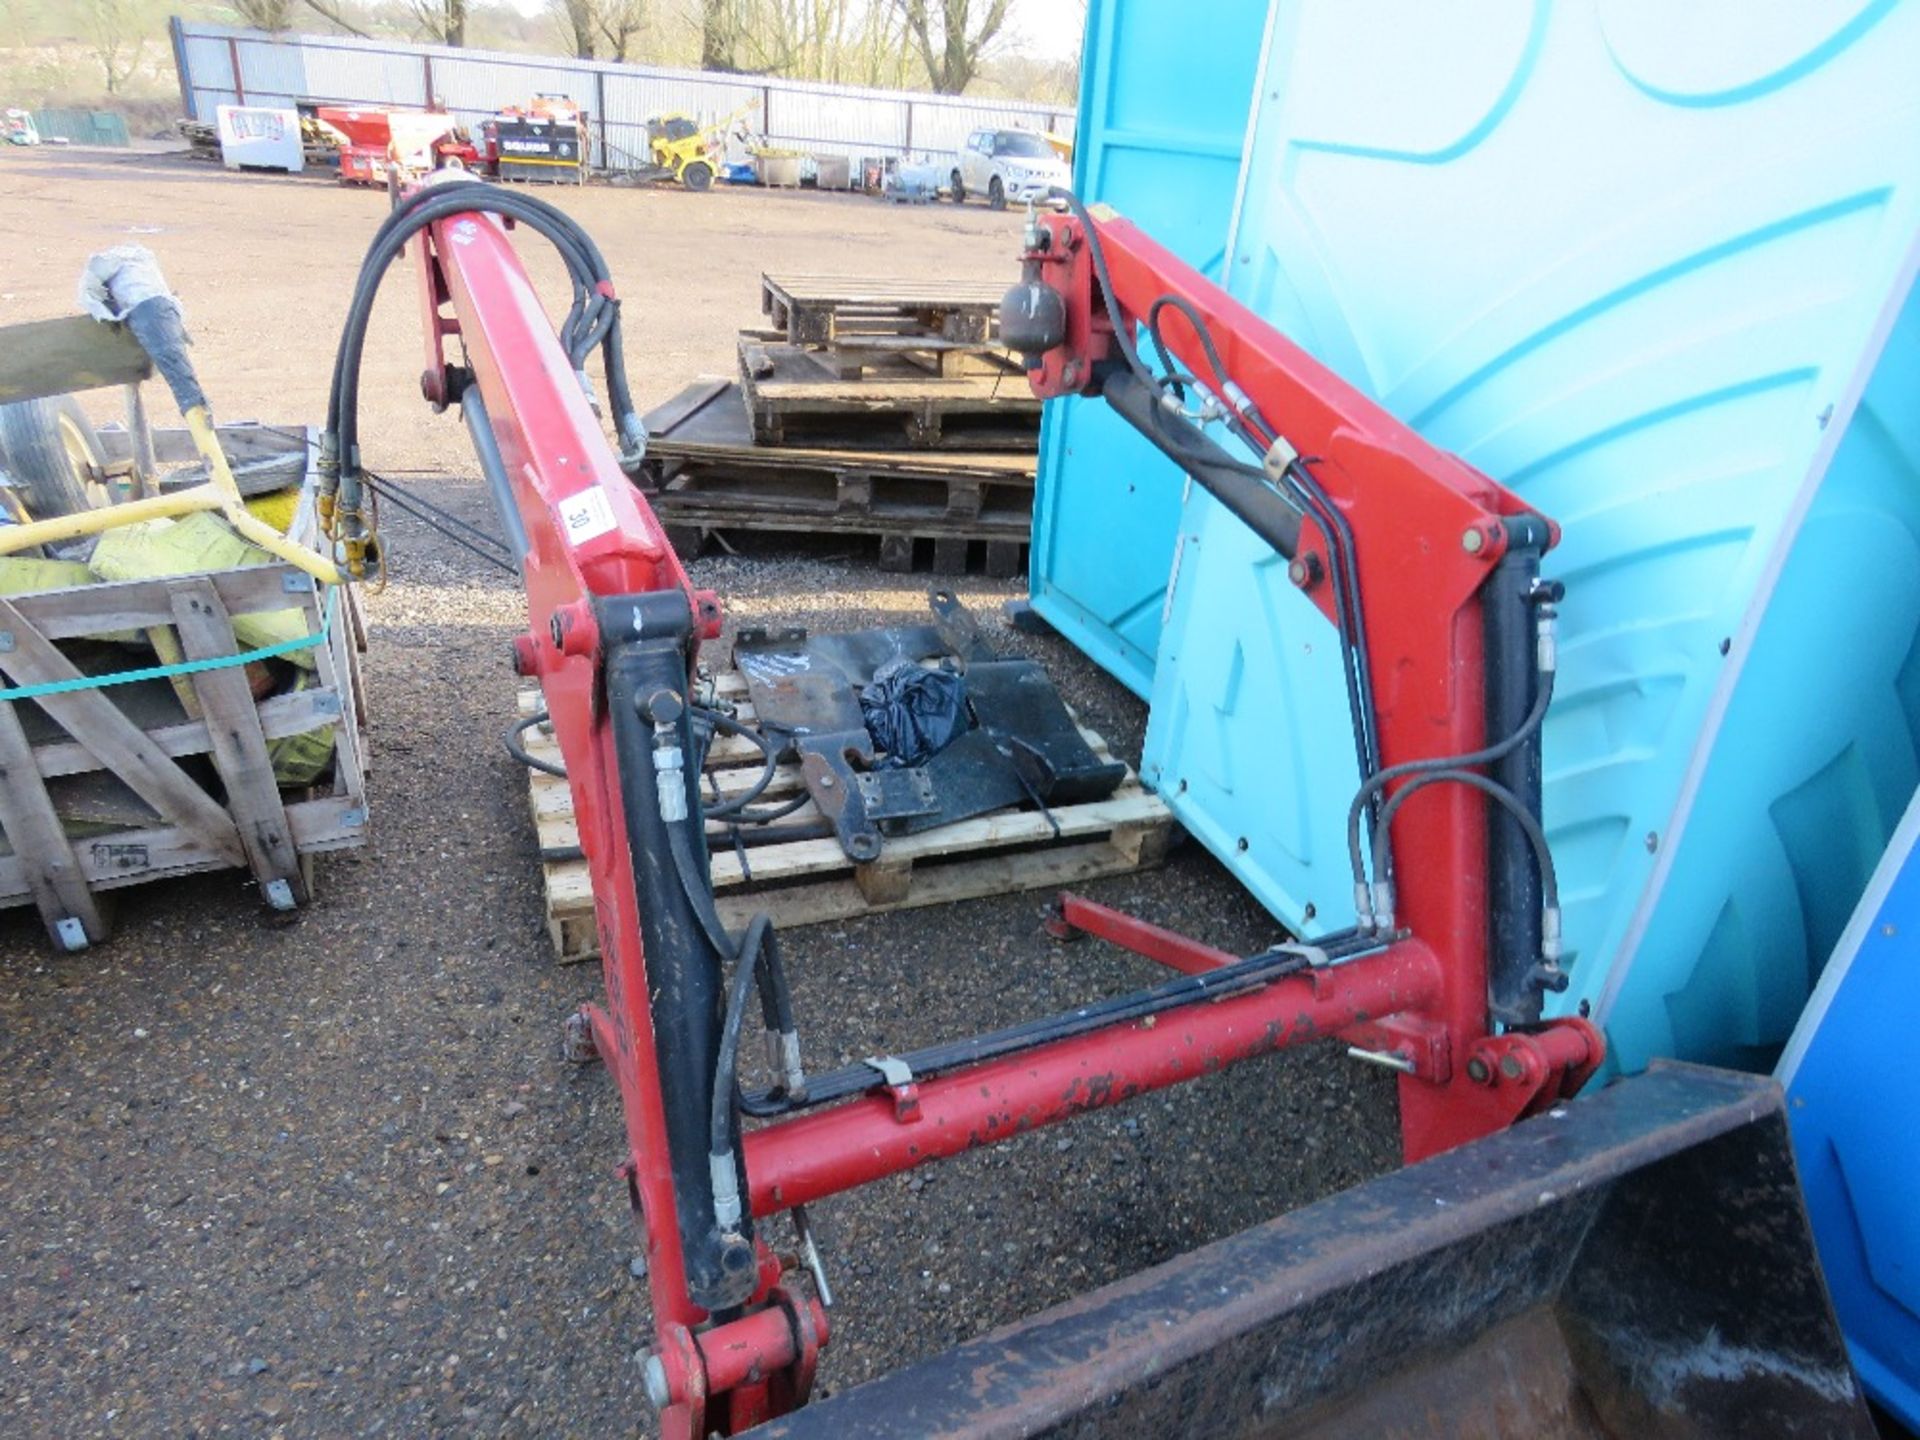 Lewis 25Q loader and bucket for compact tractor. With joystick spool valve and hydraulic piping. - Image 3 of 8